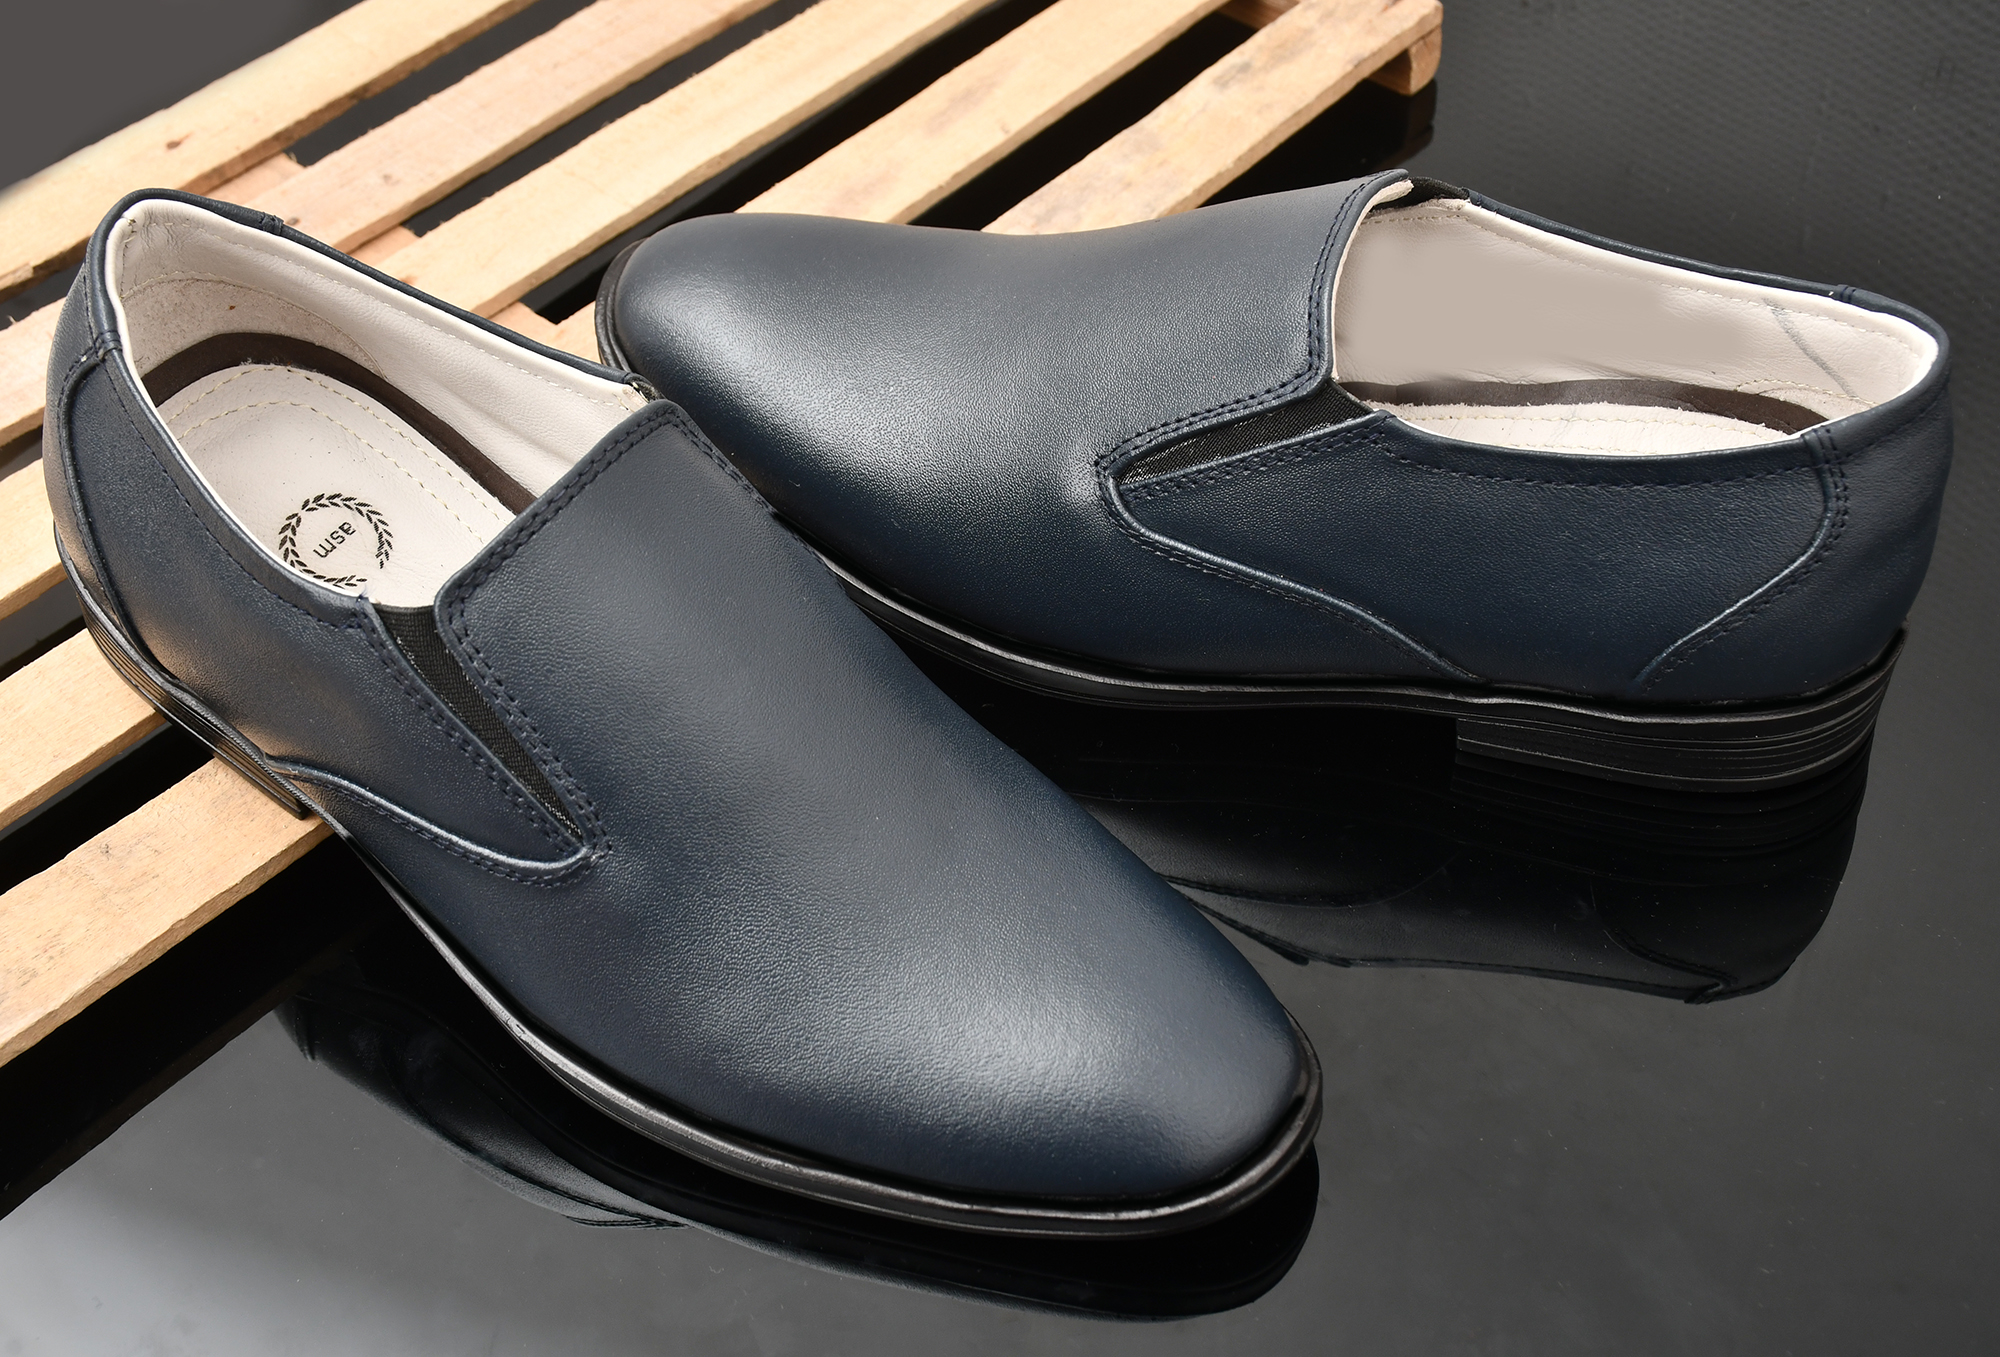 Pure Leather Slip on Shoes by asm.